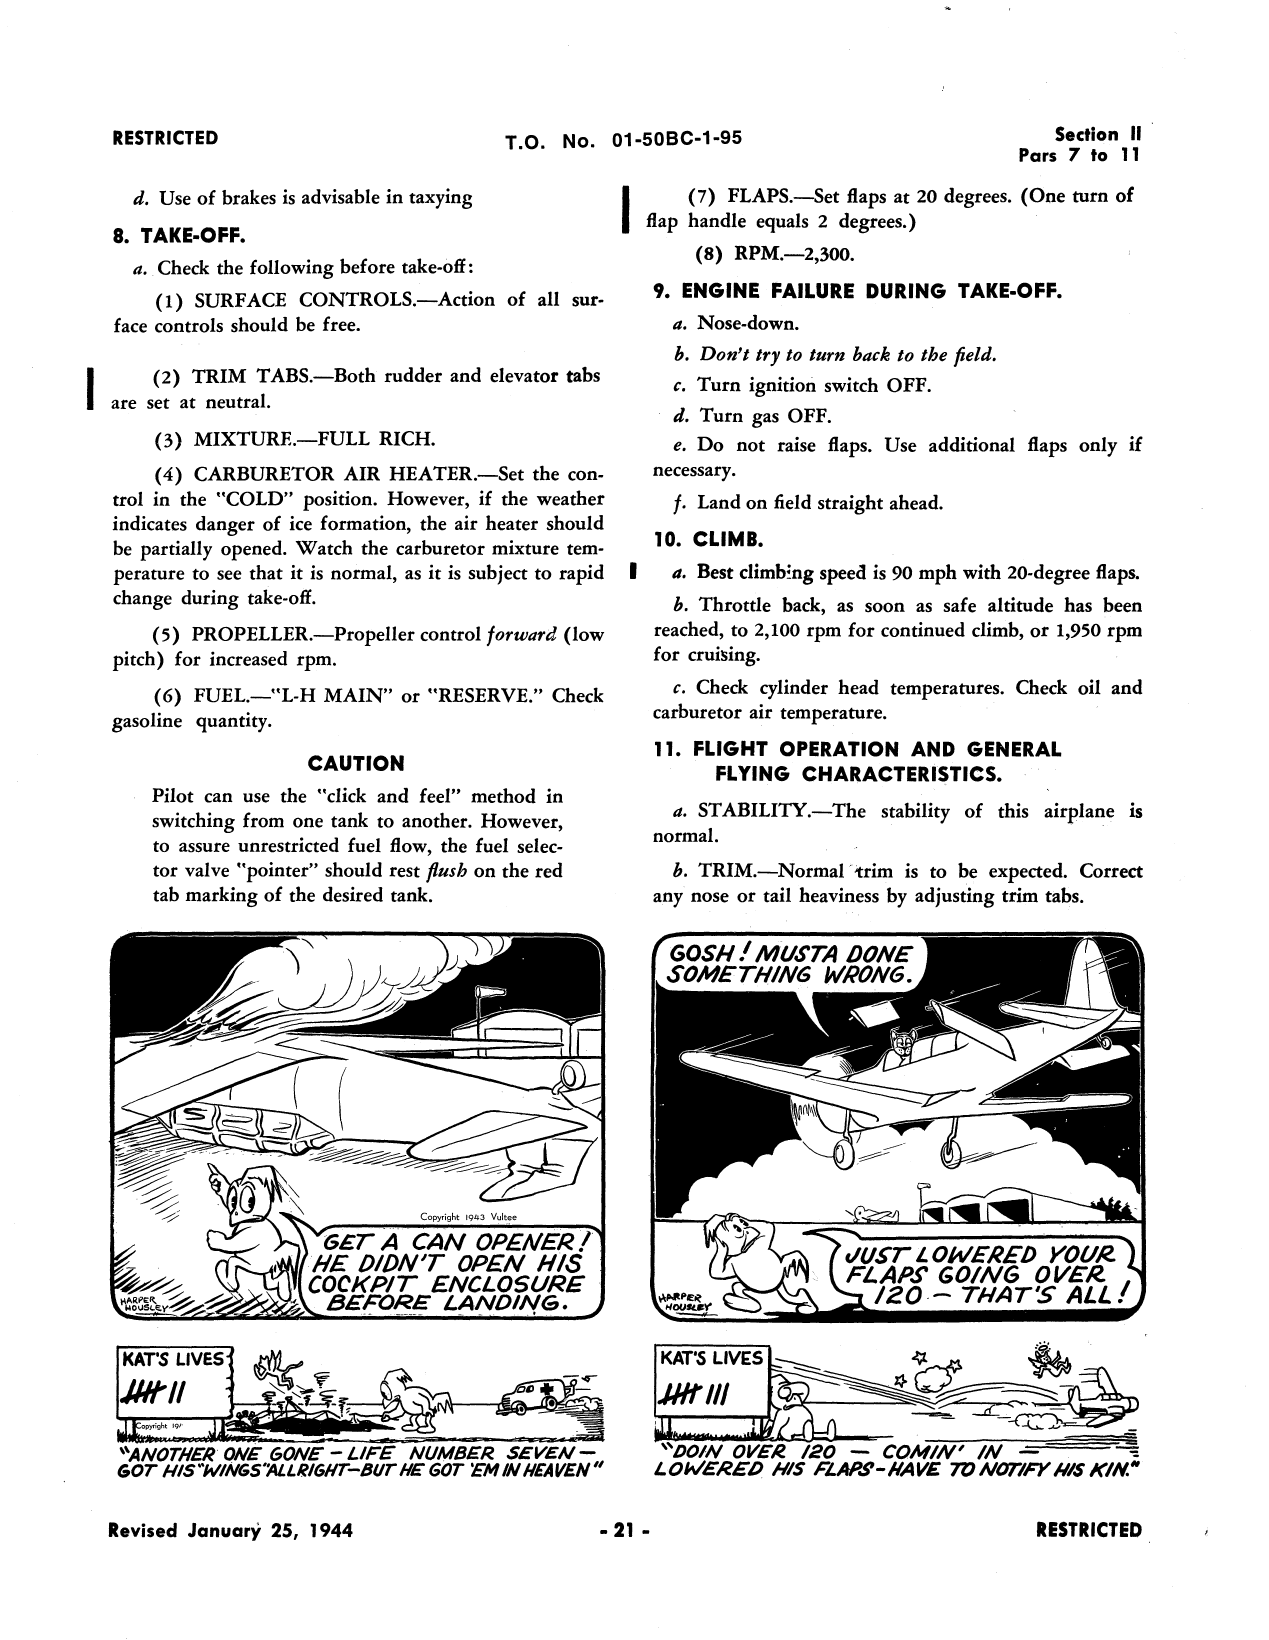 Sample page 26 from AirCorps Library document: Pilot's Handbook - BT-13